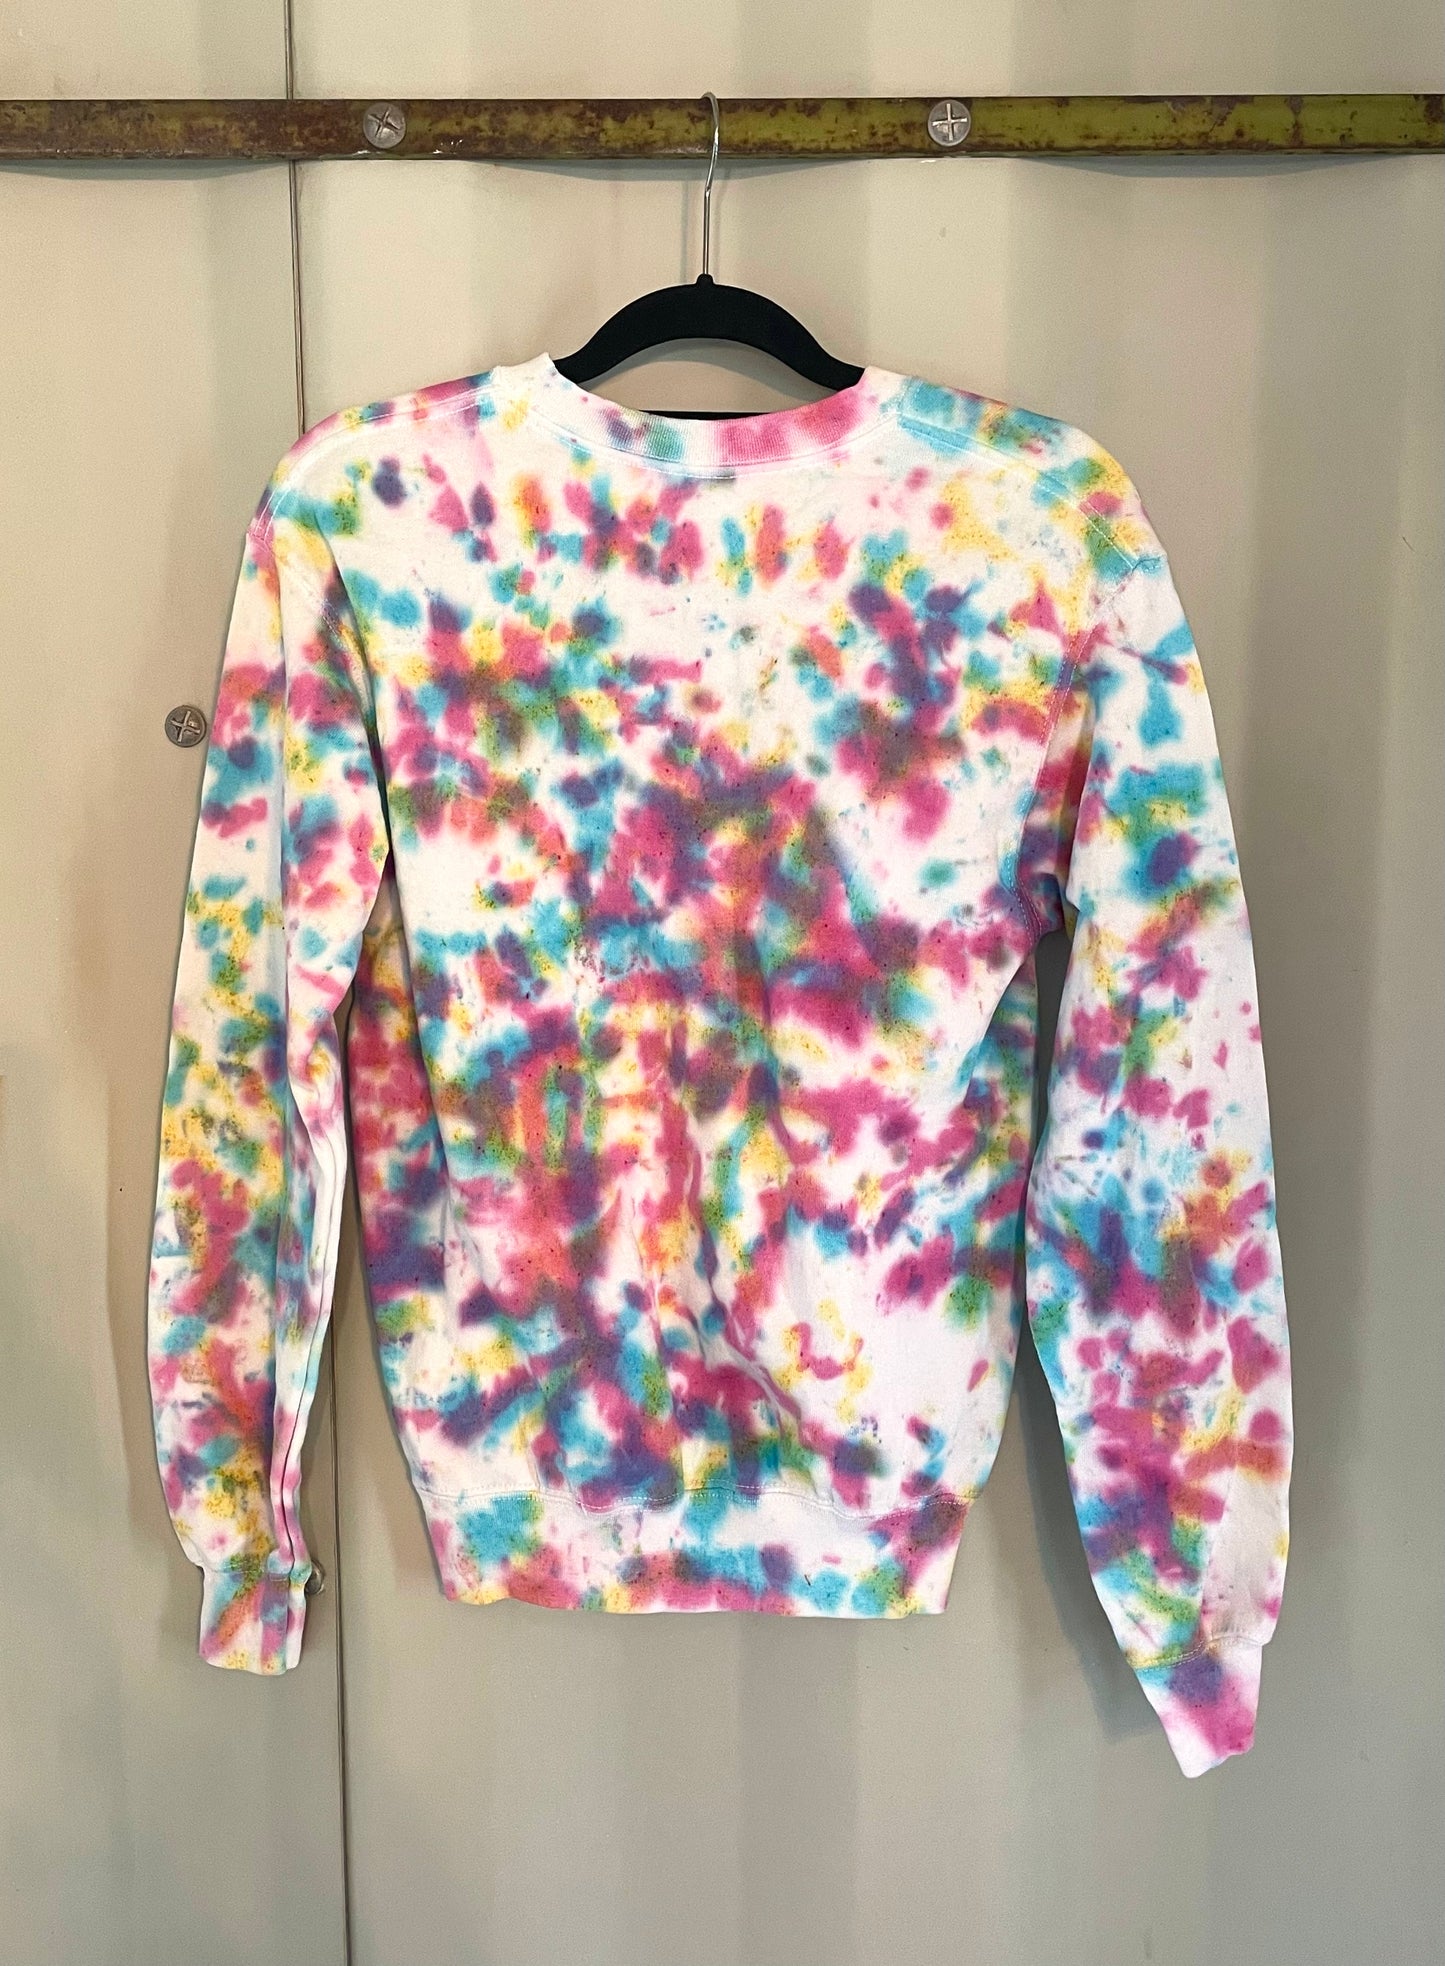 Hand-dyed sweater MELTED RAINBOW